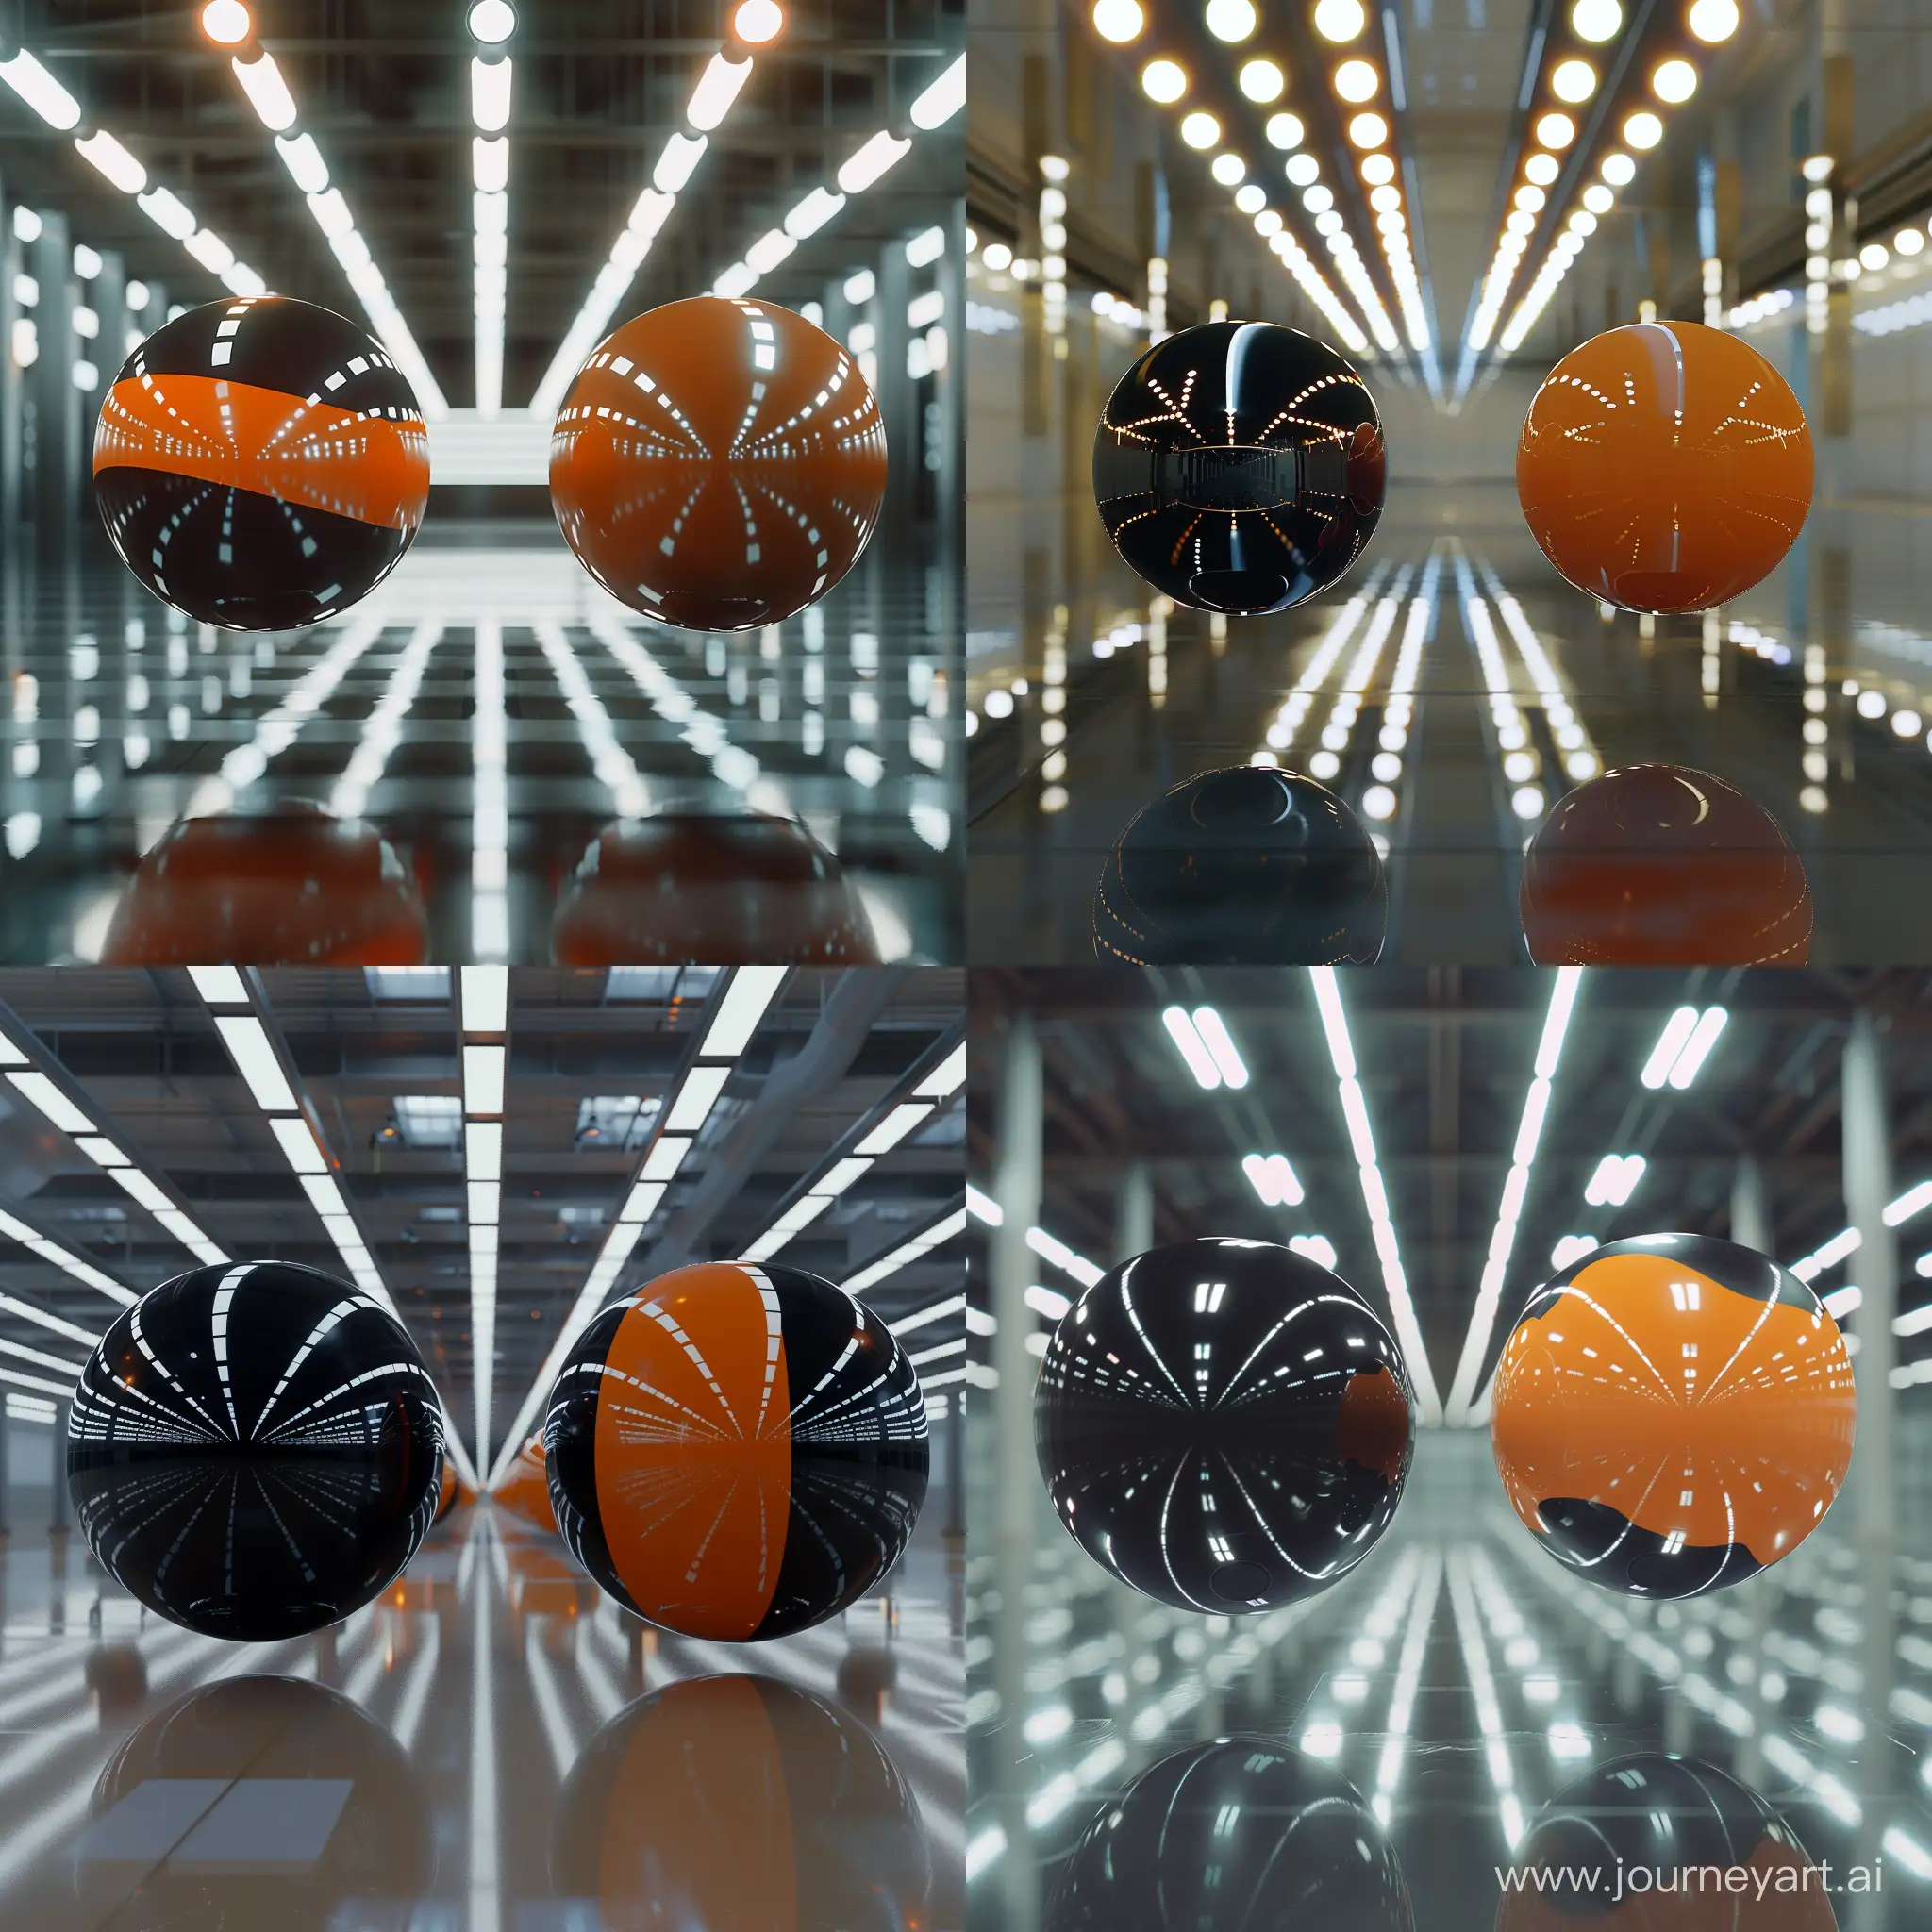 Two glossy painted spheres of black and orange levitate in a big hall with rows of light on the ceiling, the ground floor is very reflective, photo realistic, high resolution, unreal quality